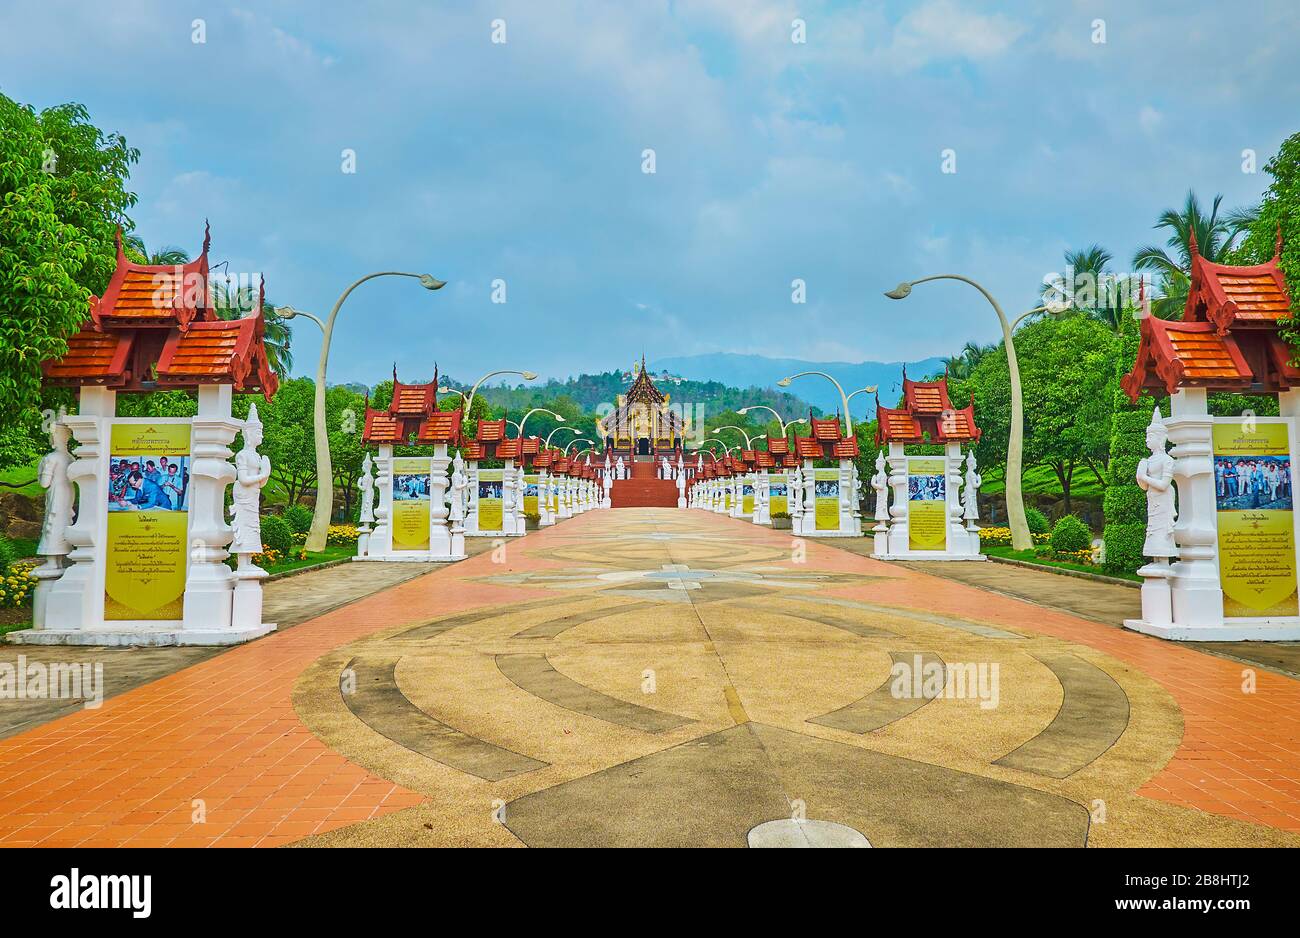 CHIANG MAI, THAILAND - MAY 7, 2019: The long alley with mosaic floor and many info stands leads to the Royal Pavilion of Rajapruek park, on May 7 in C Stock Photo